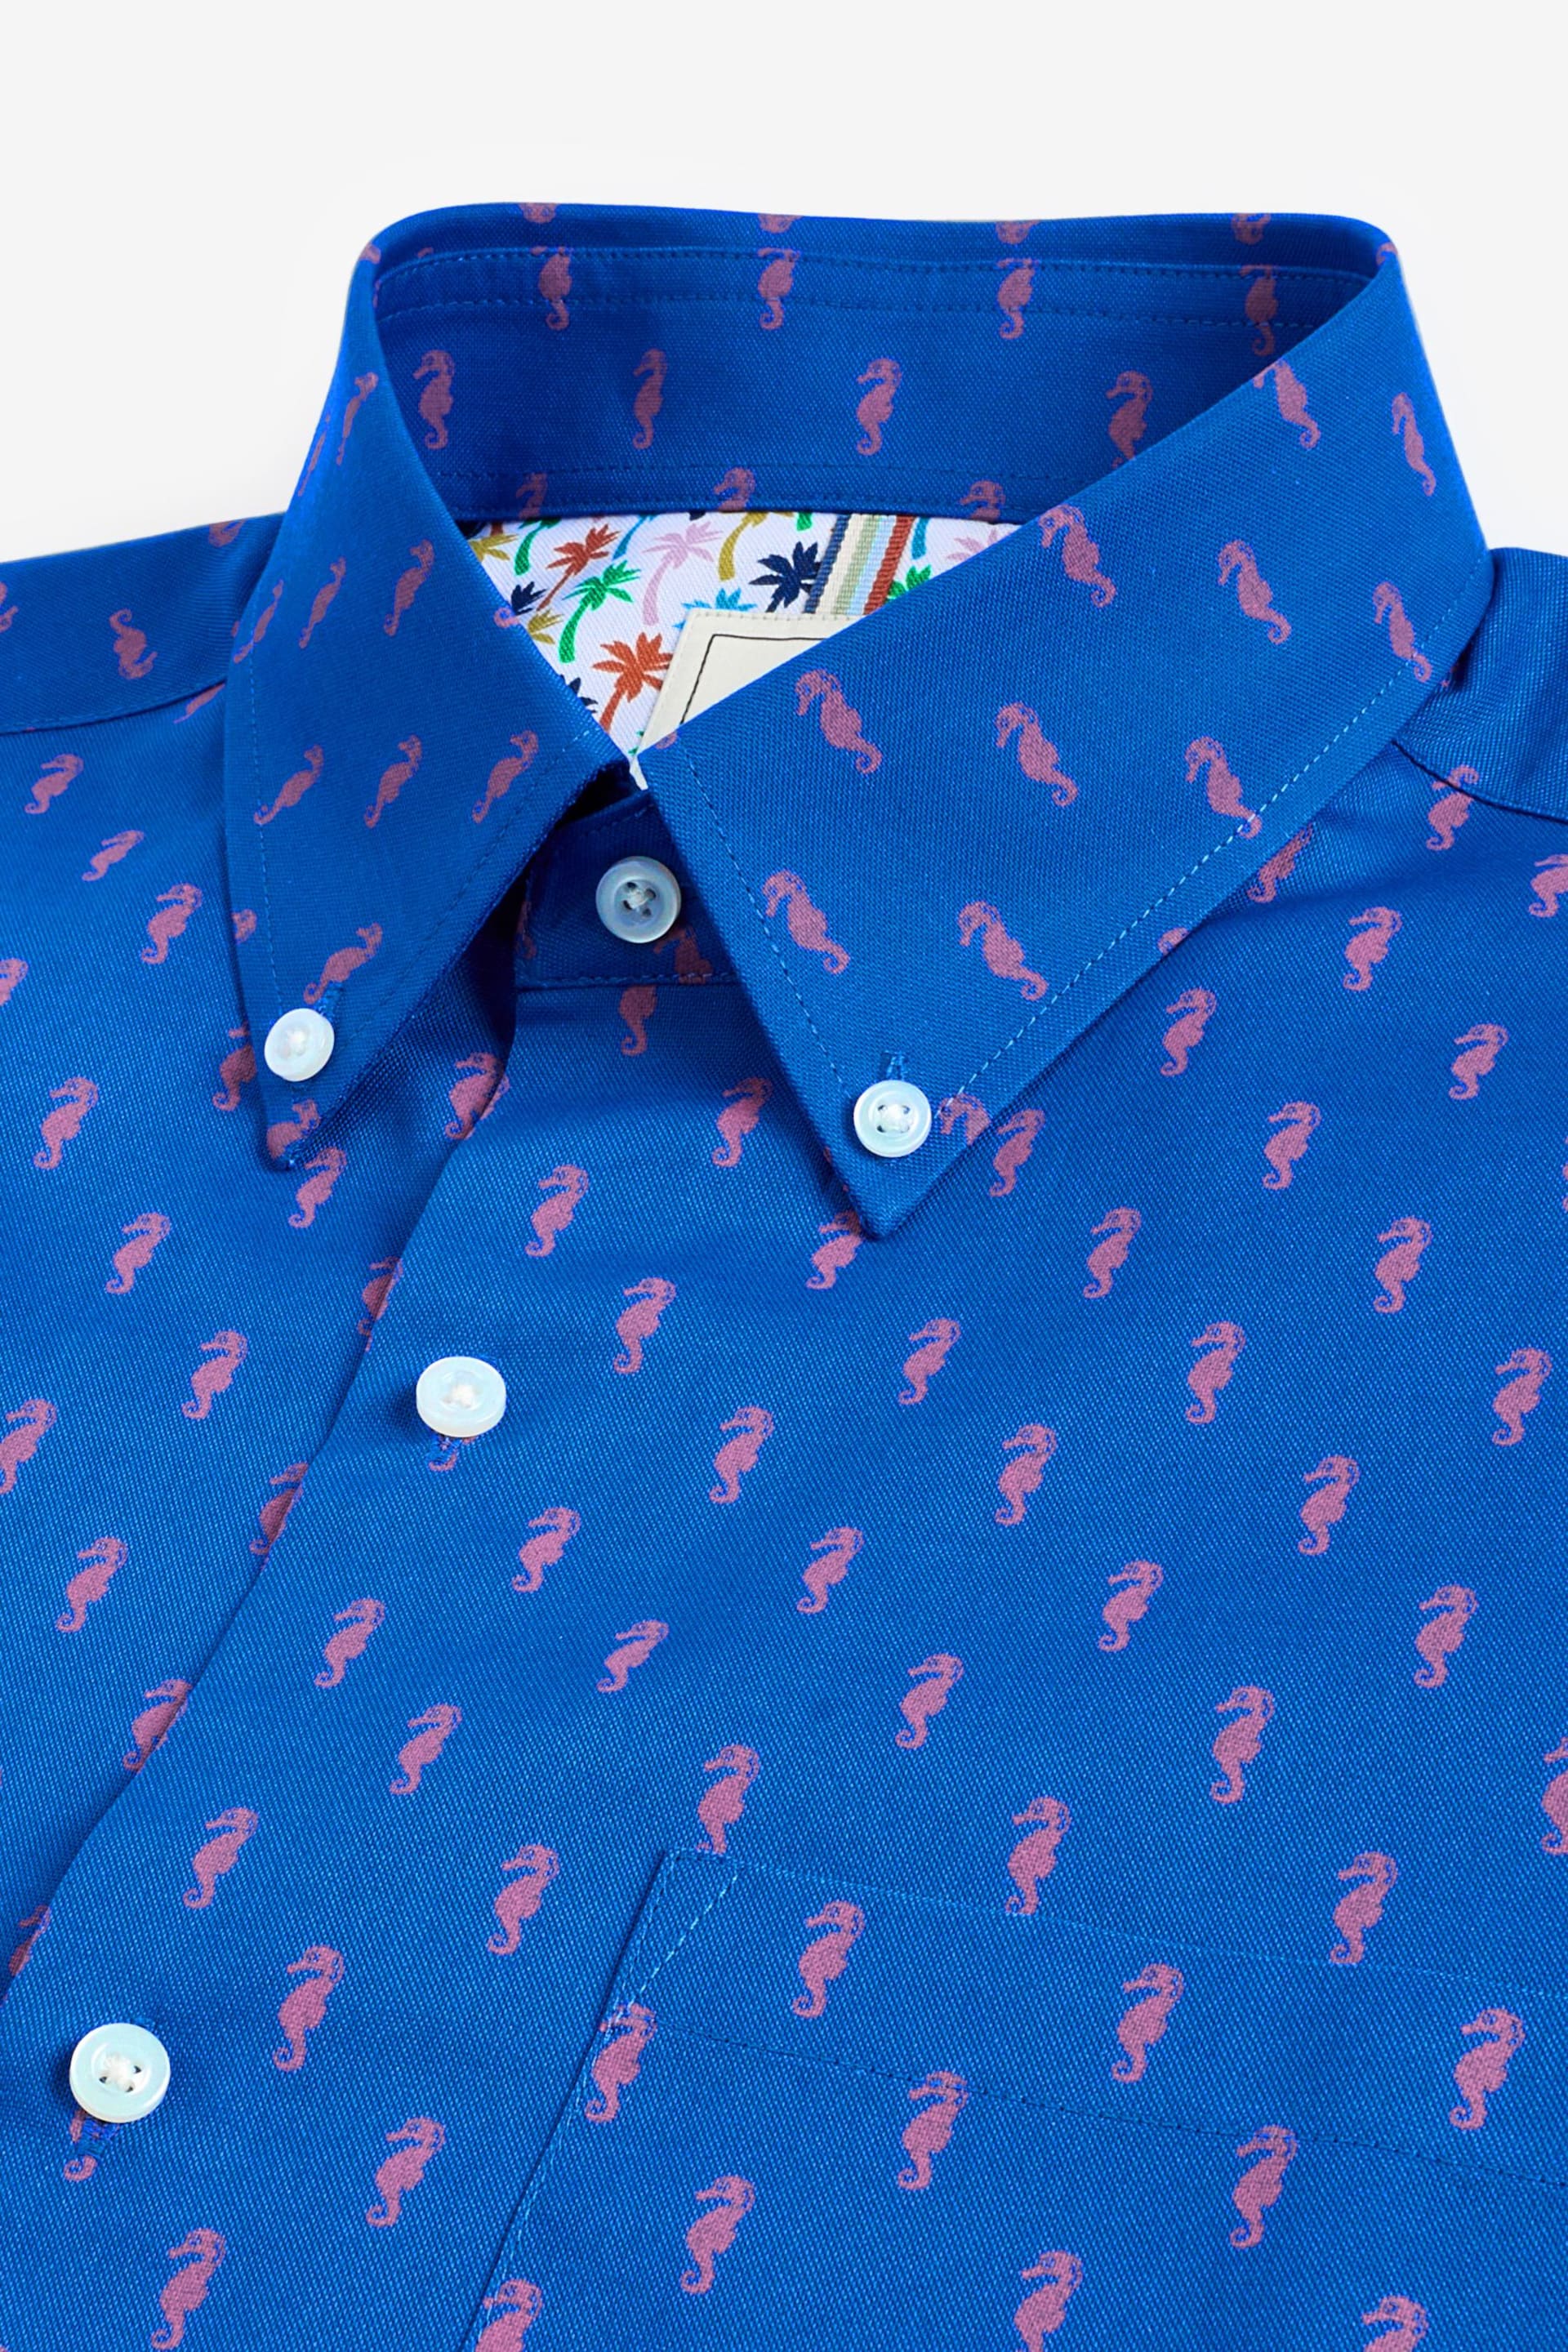 Blue/Pink Seahorse Easy Iron Button Down Short Sleeve Oxford Shirt - Image 8 of 9